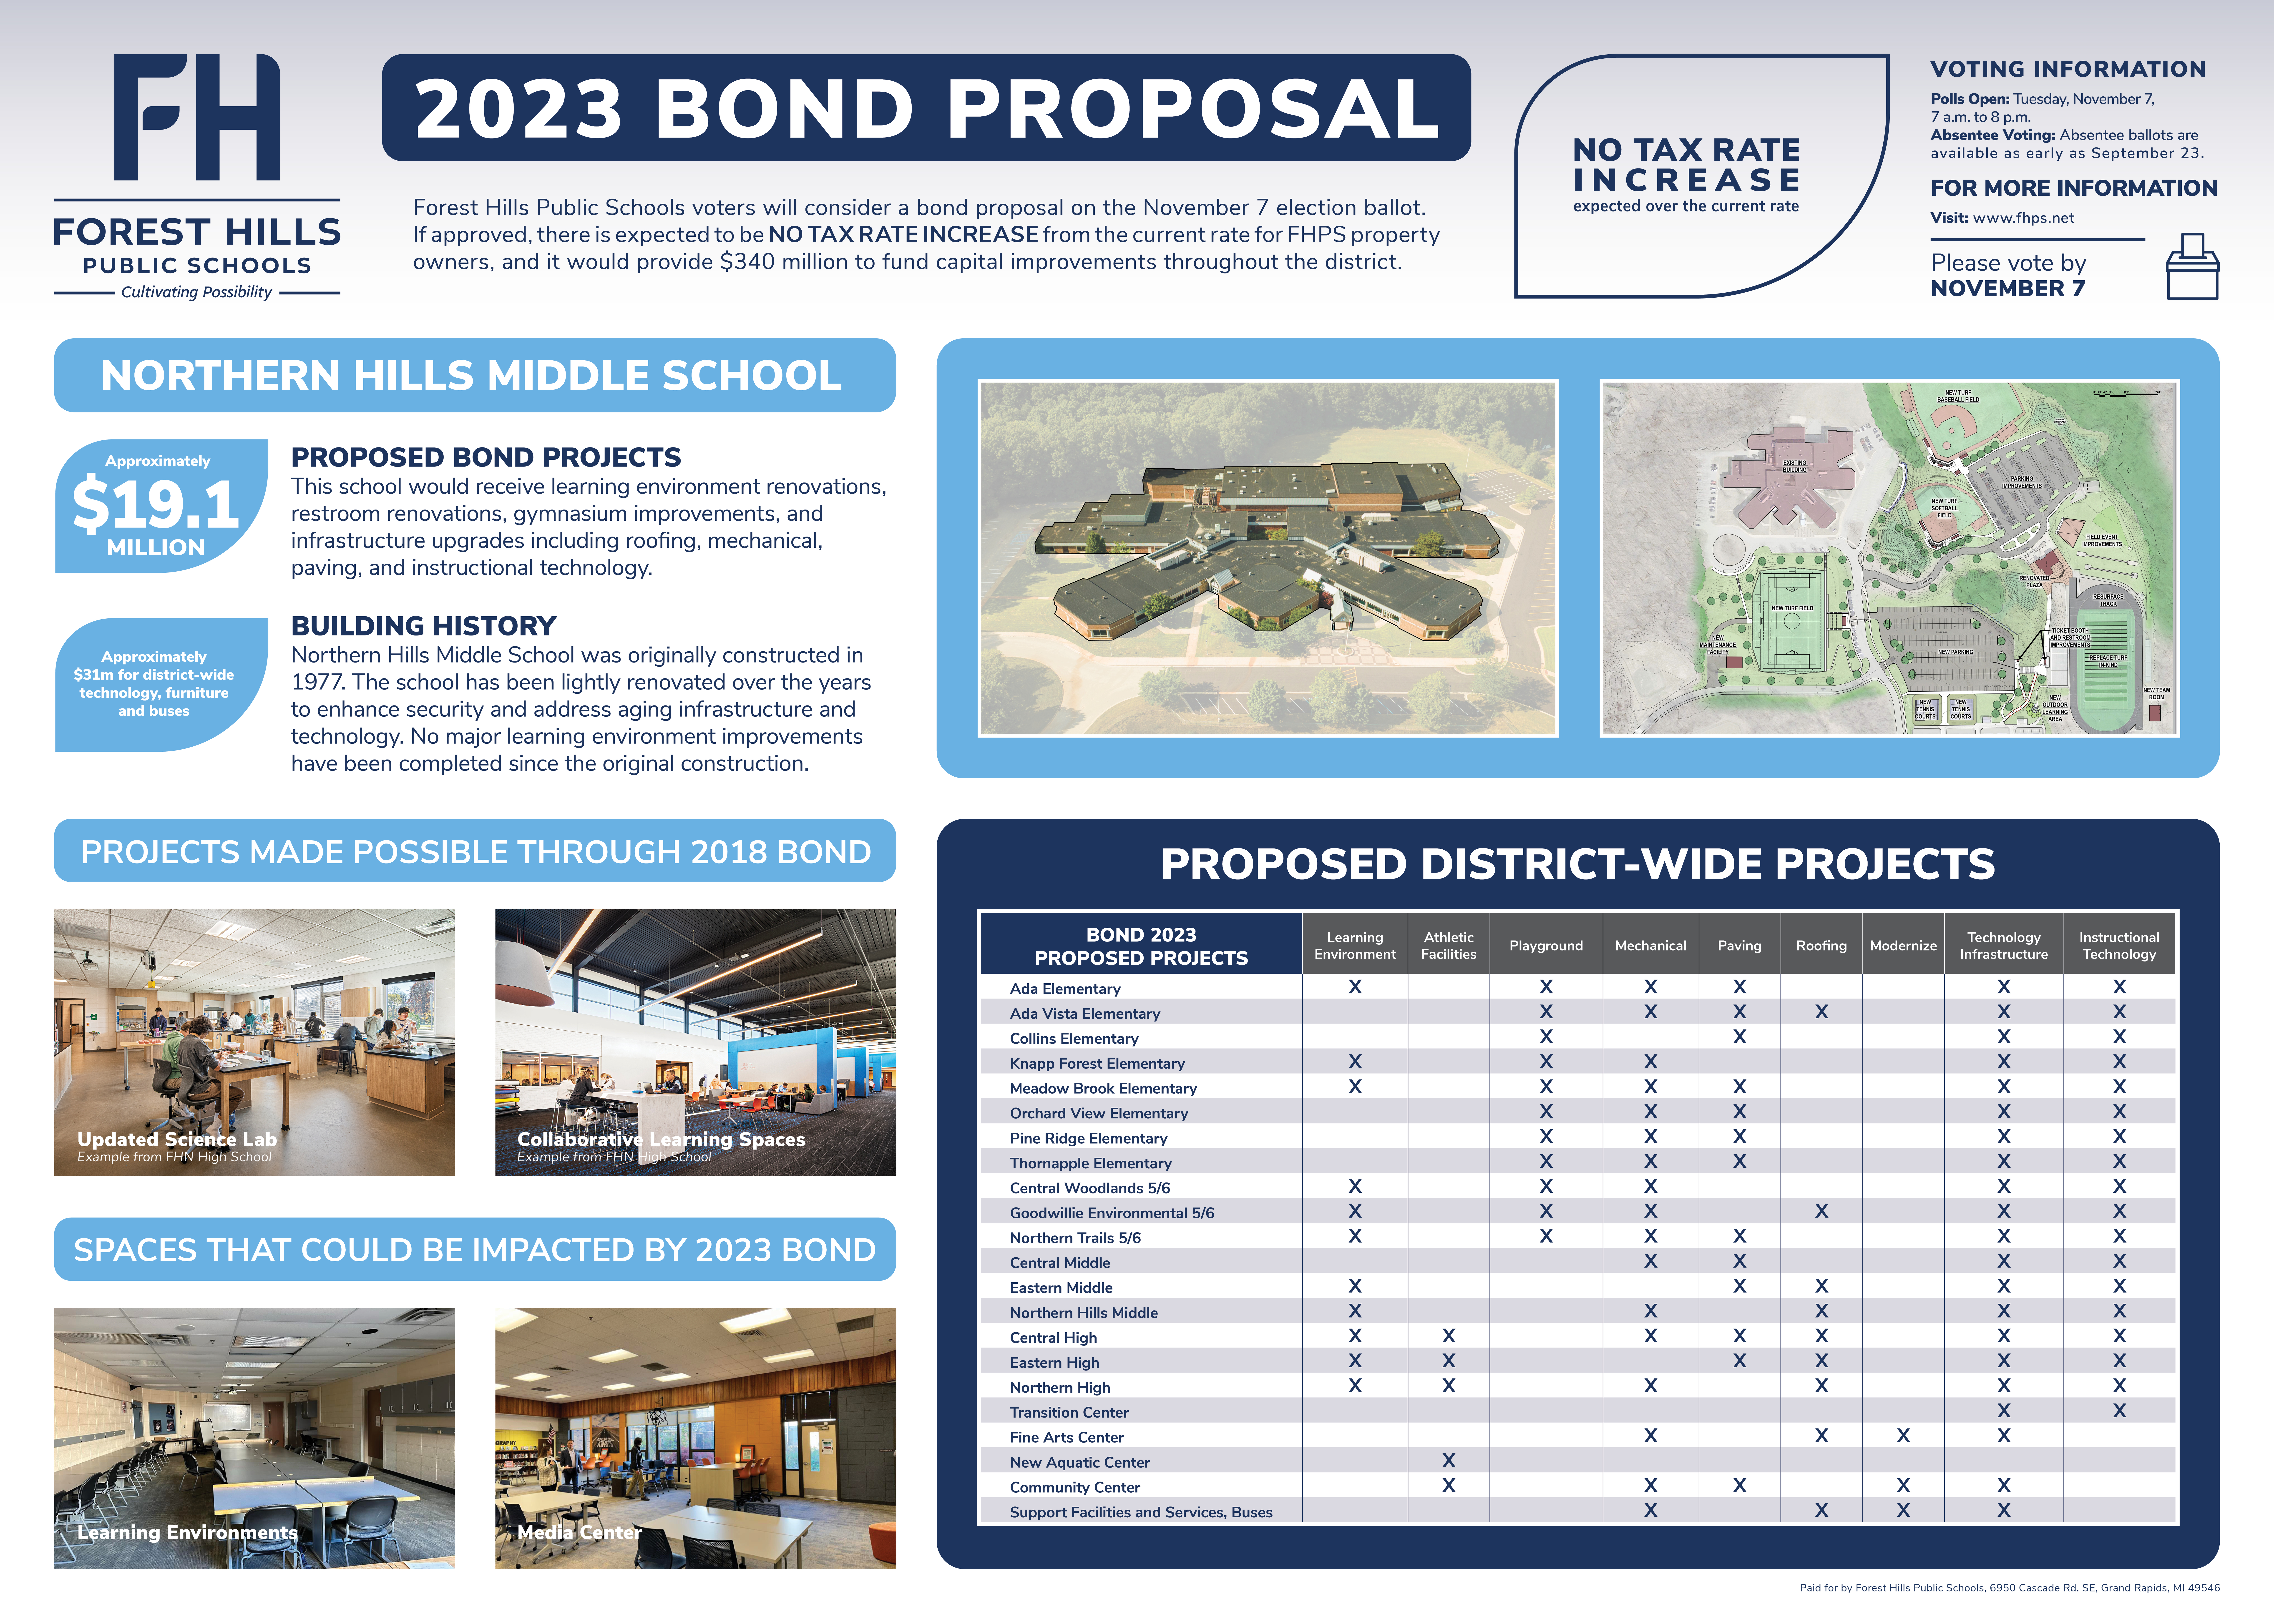 Northern Hills Middle and pictures of the existing building and bond project pictures from 2018 and spaces that could be impacted by the 2023 bond.